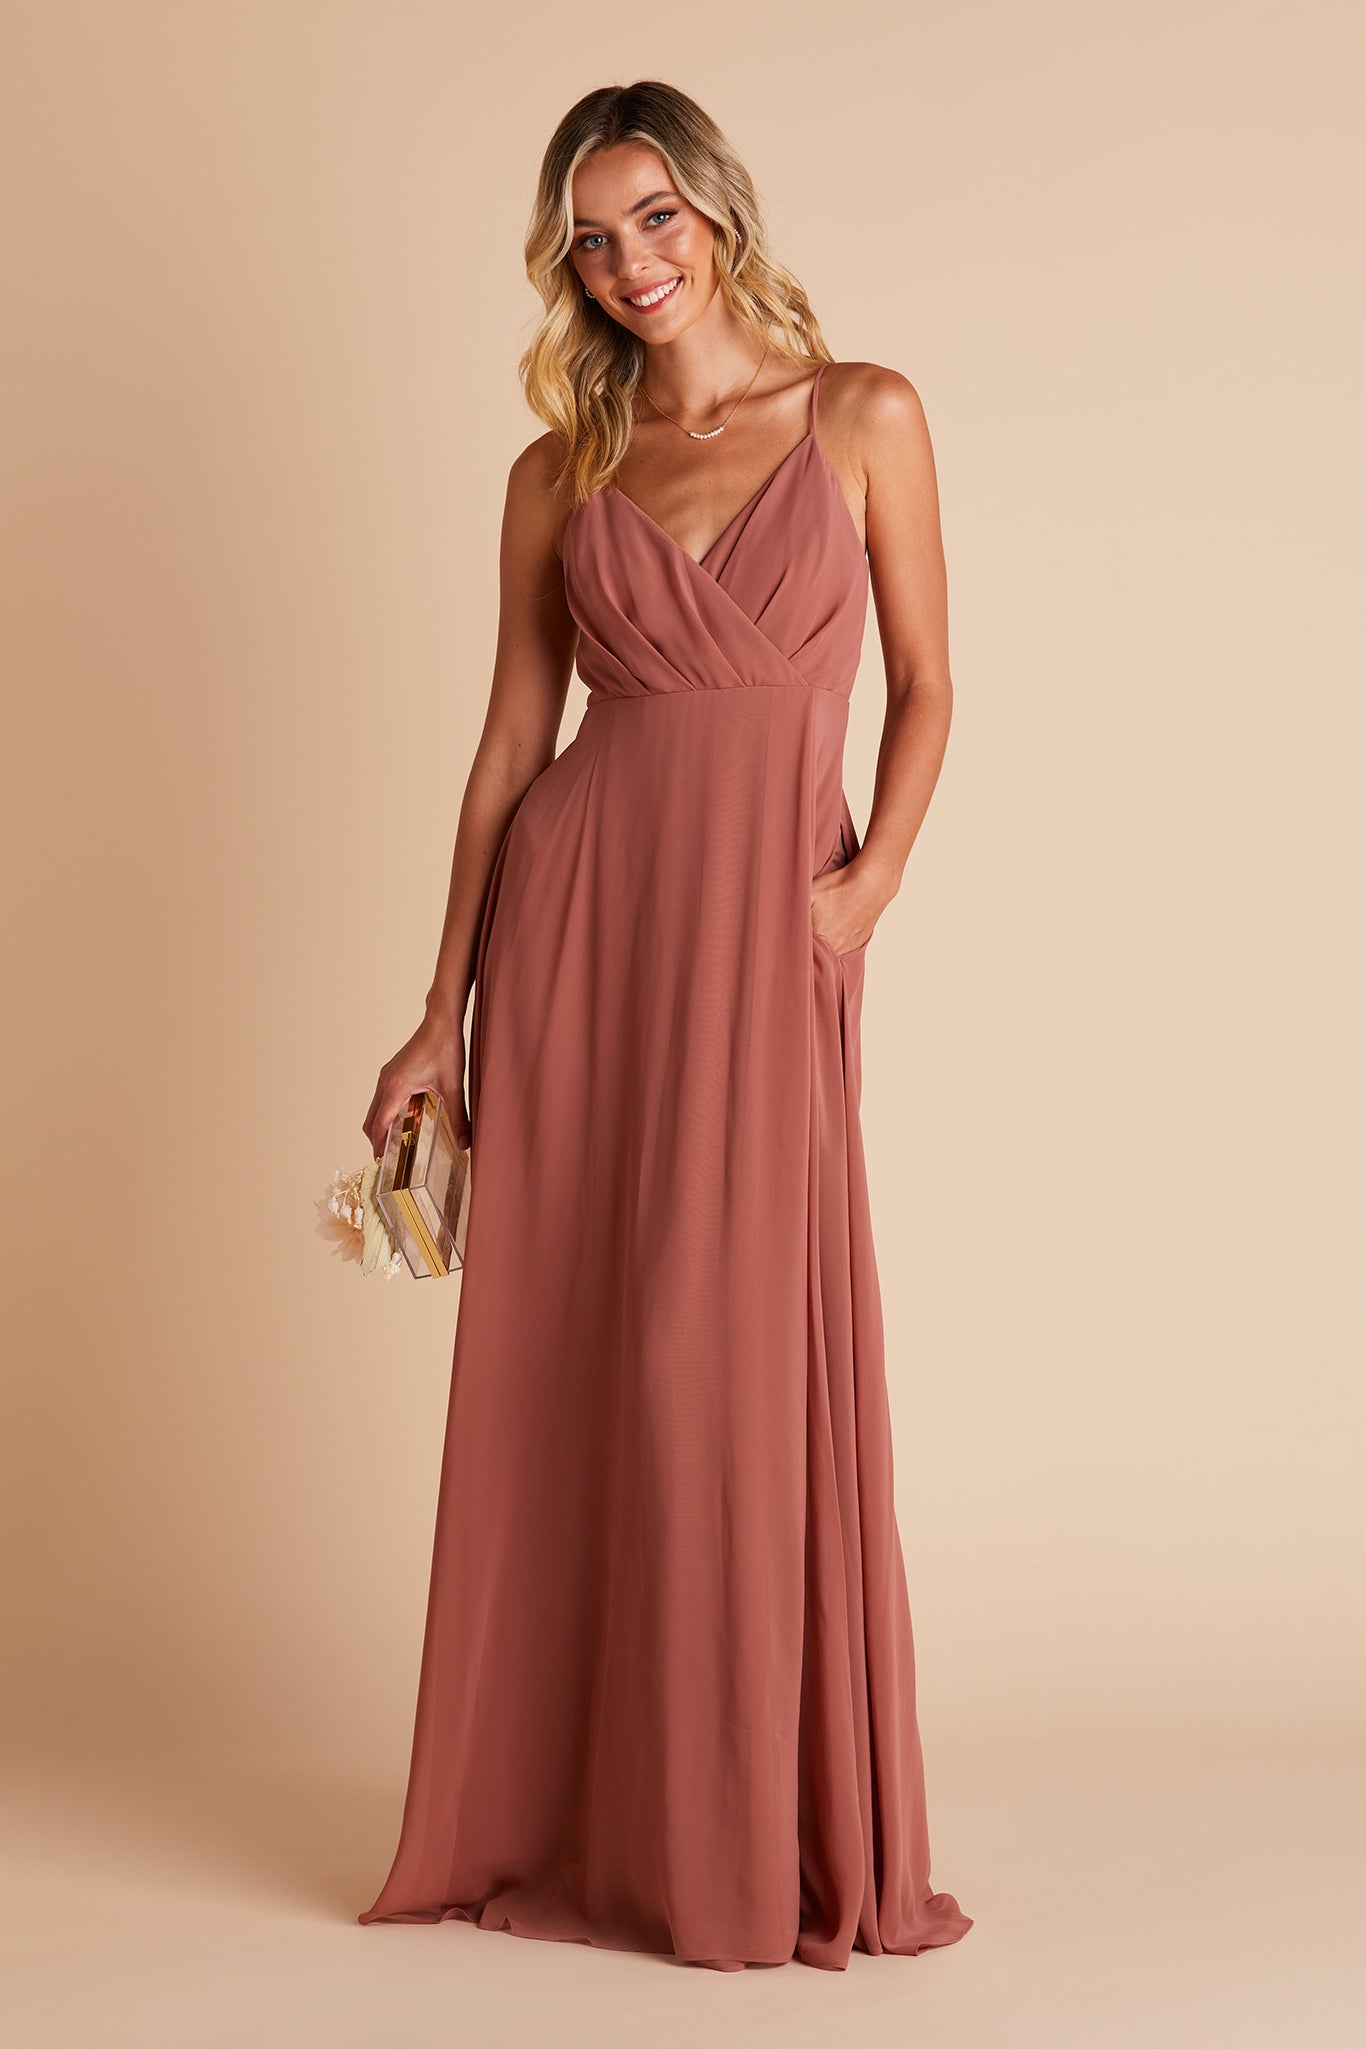 Kaia bridesmaids dress in desert rose chiffon by Birdy Grey, front view with hand in pocket